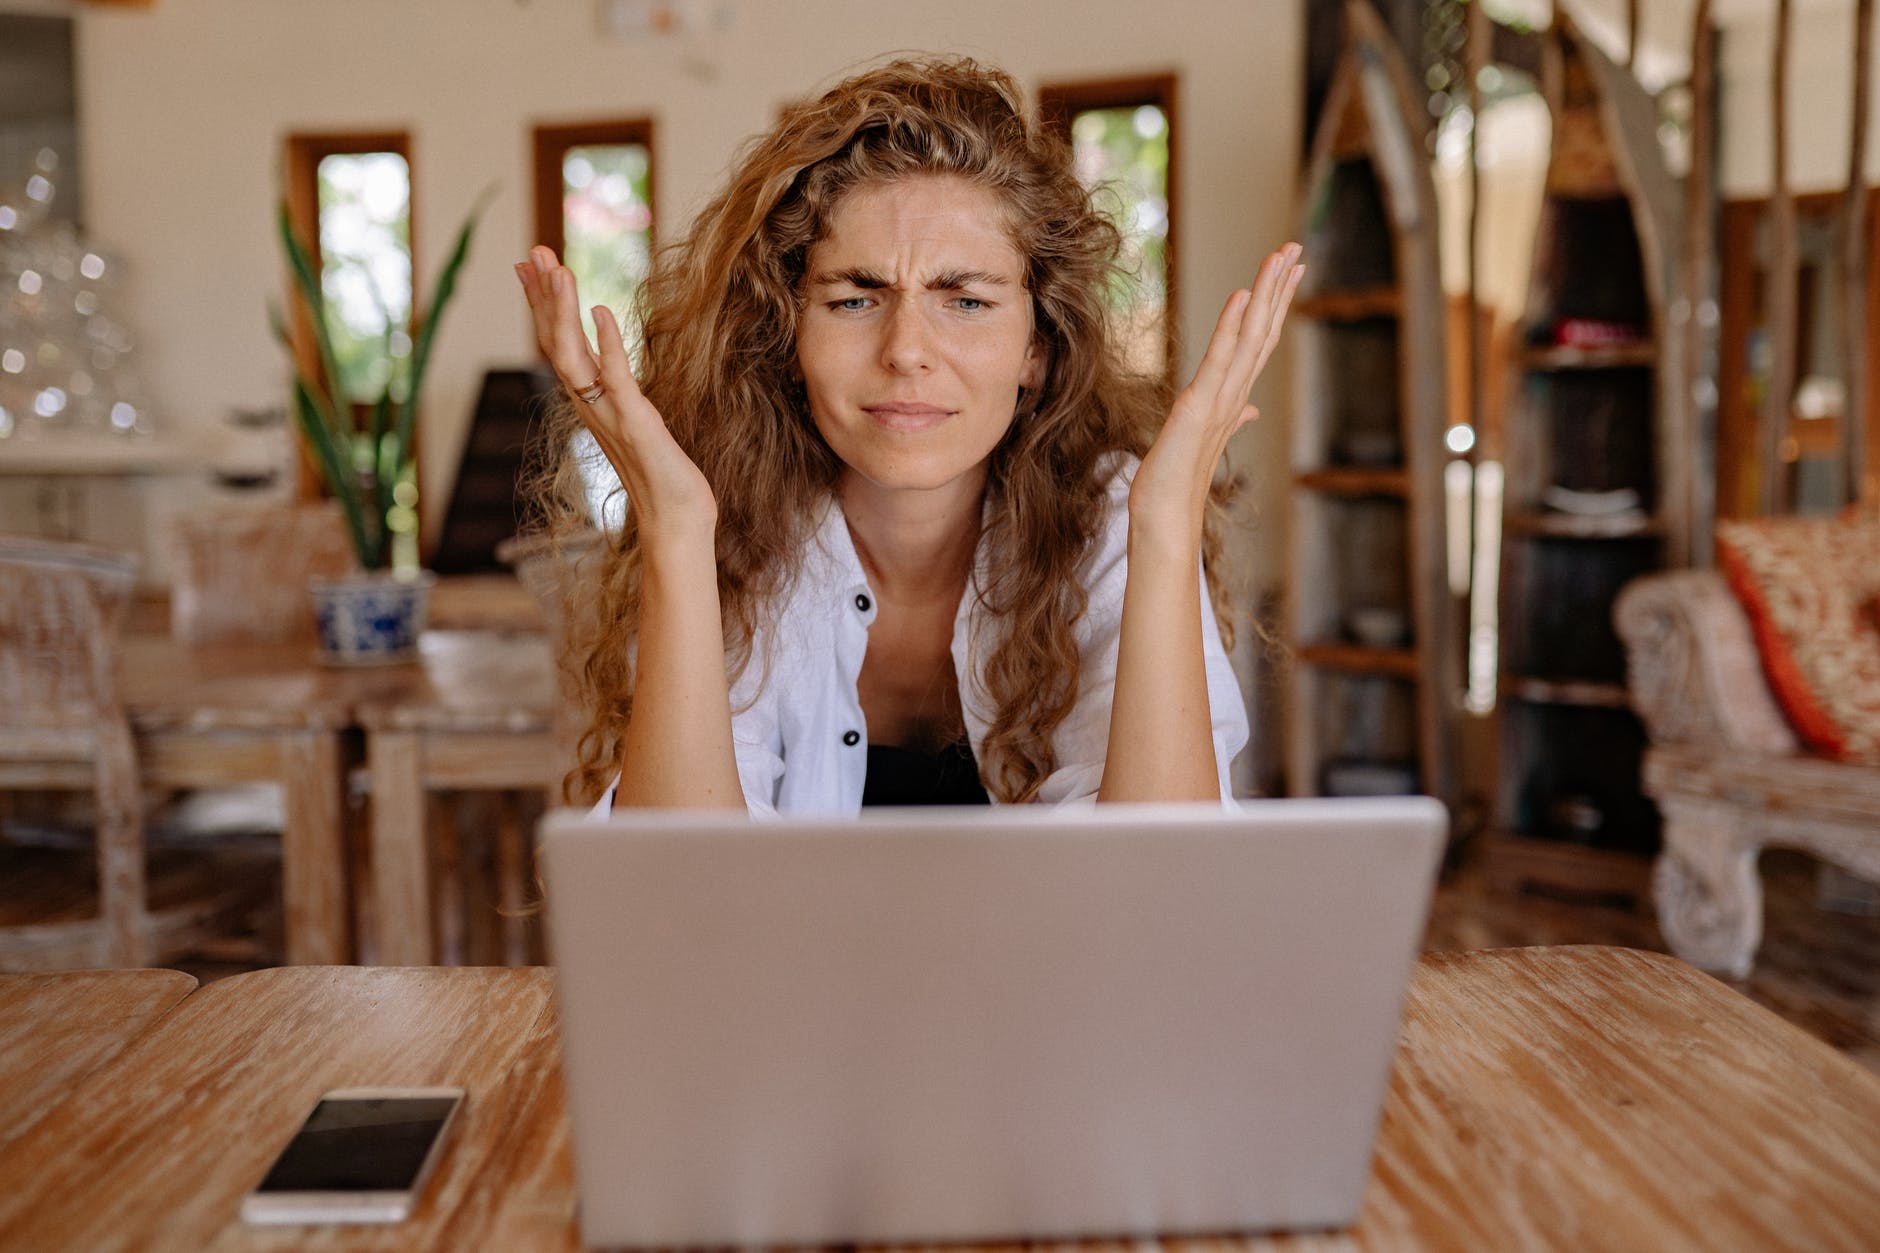 Woman throwing her hands up in frustration while looking at her laptop